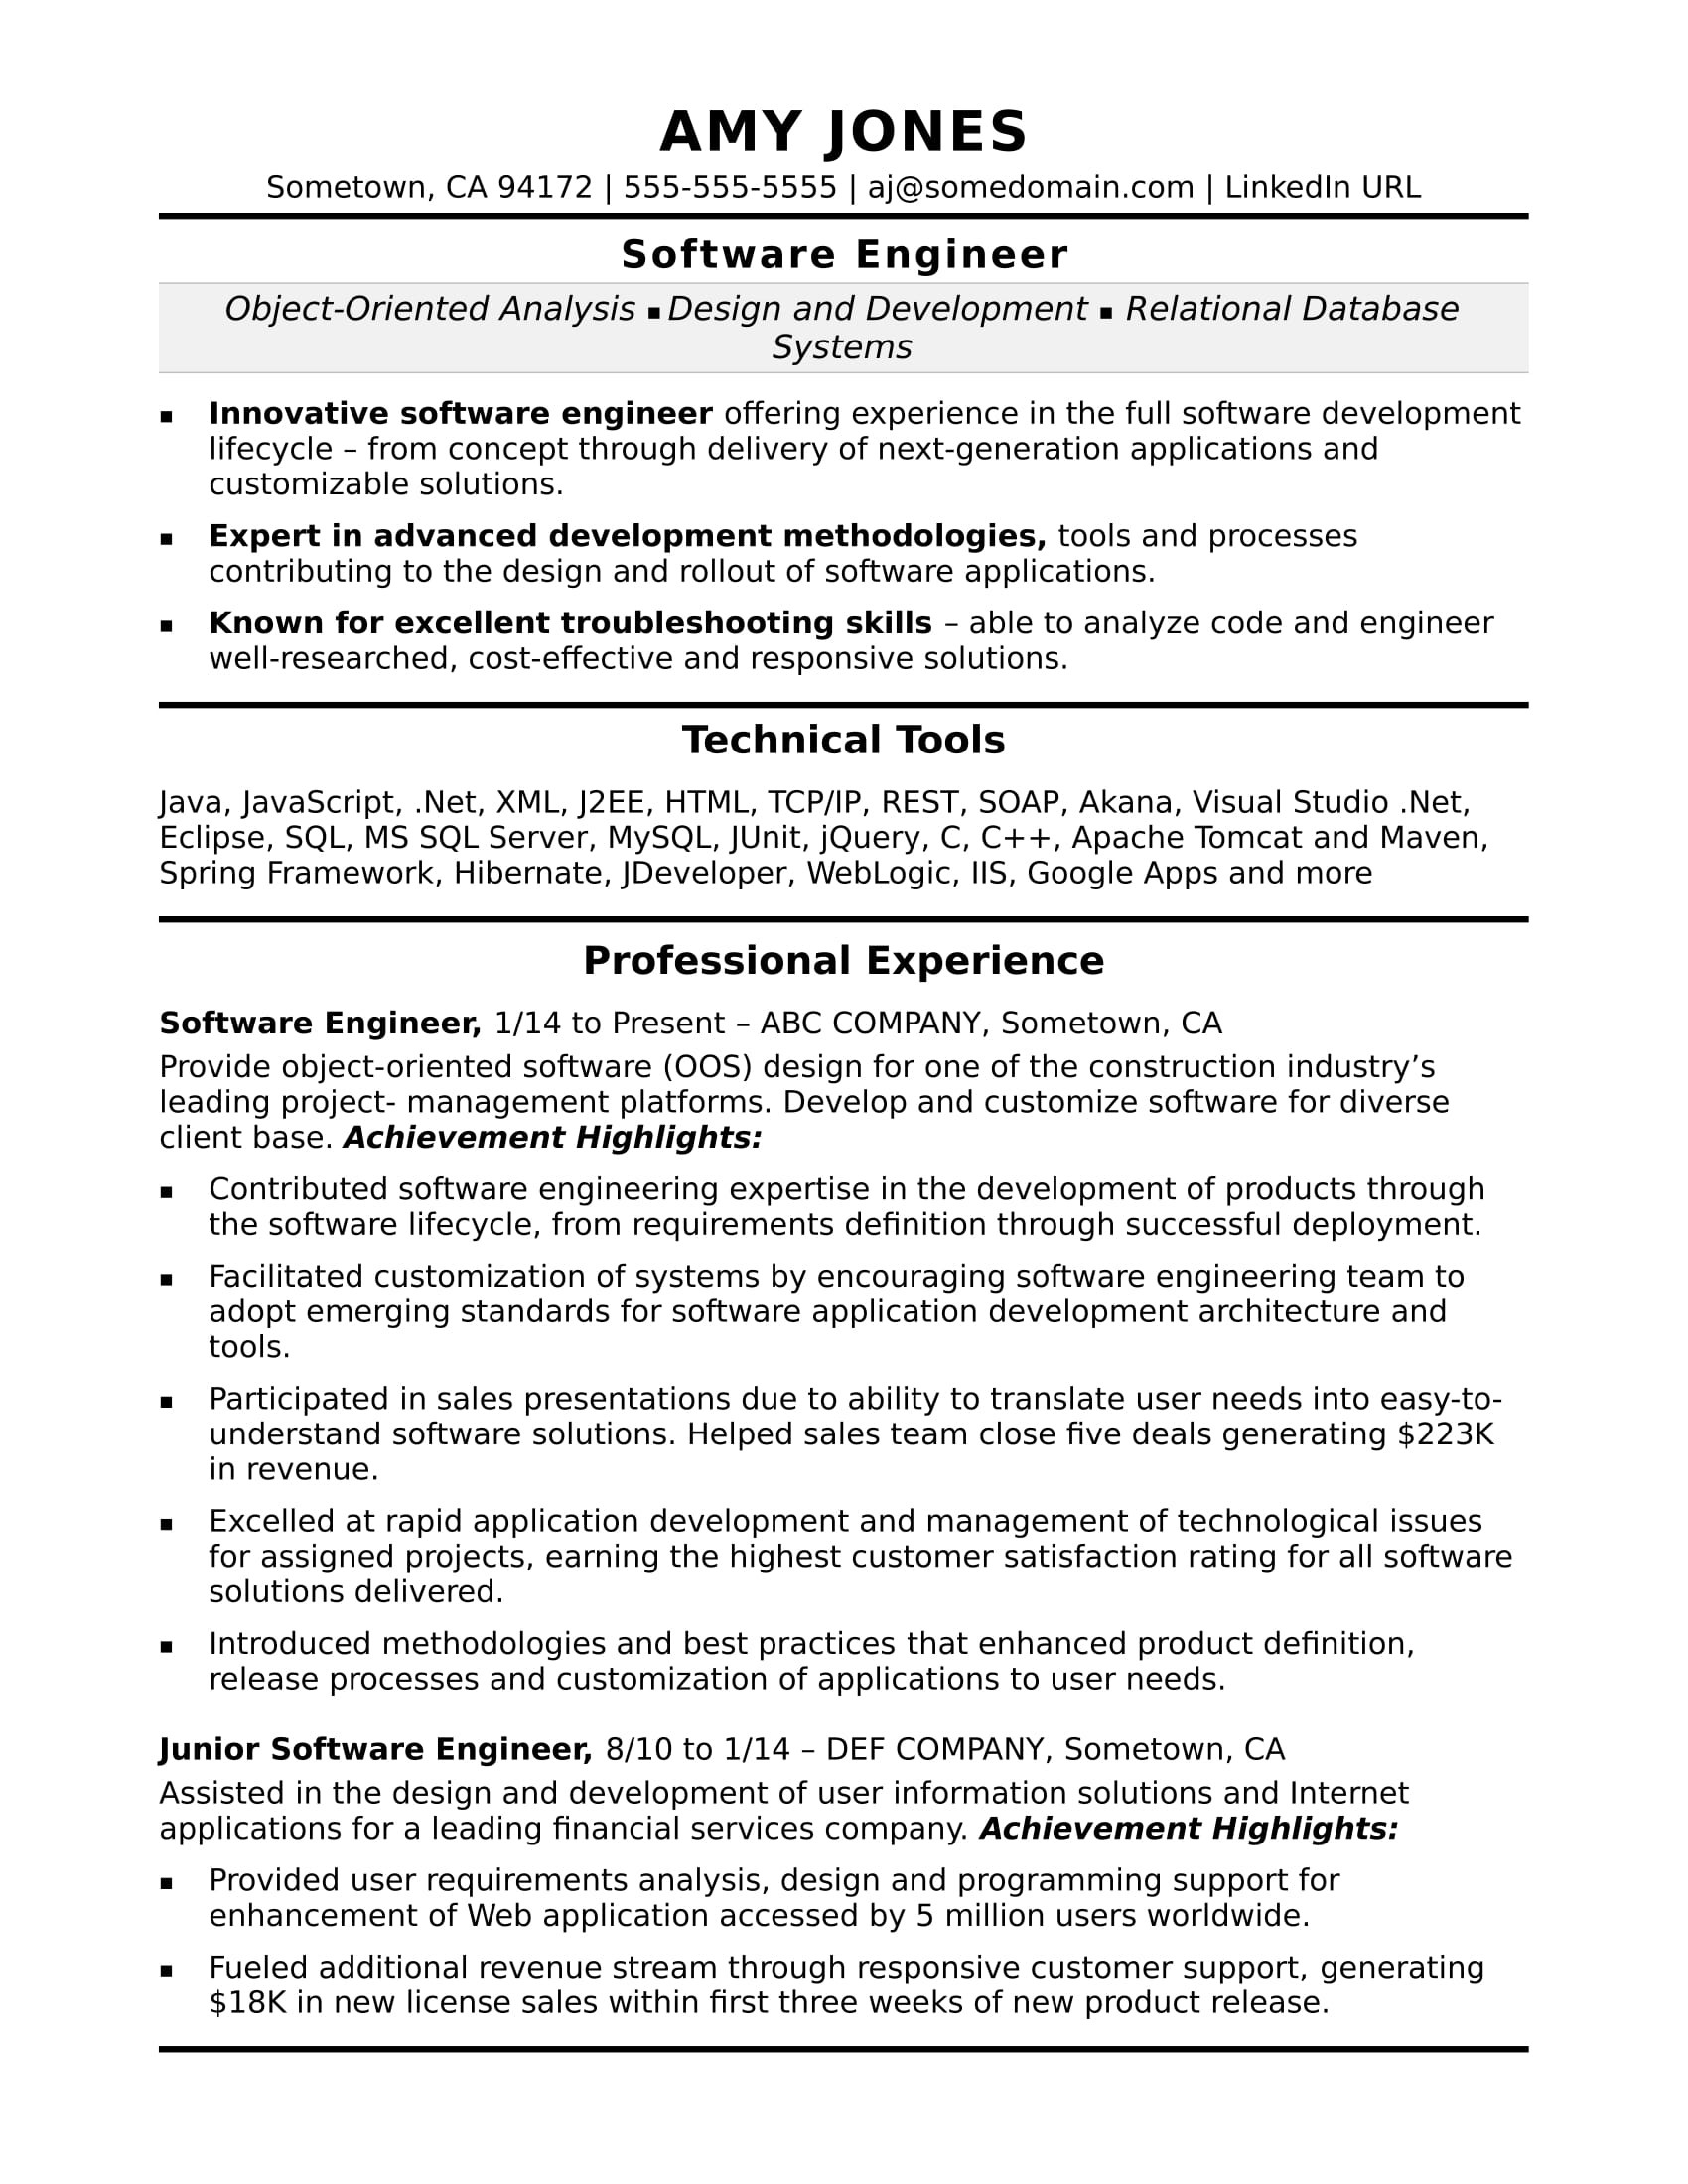 Sample Resume Of 2 Years Experience software Engineer Midlevel software Engineer Resume Sample Monster.com